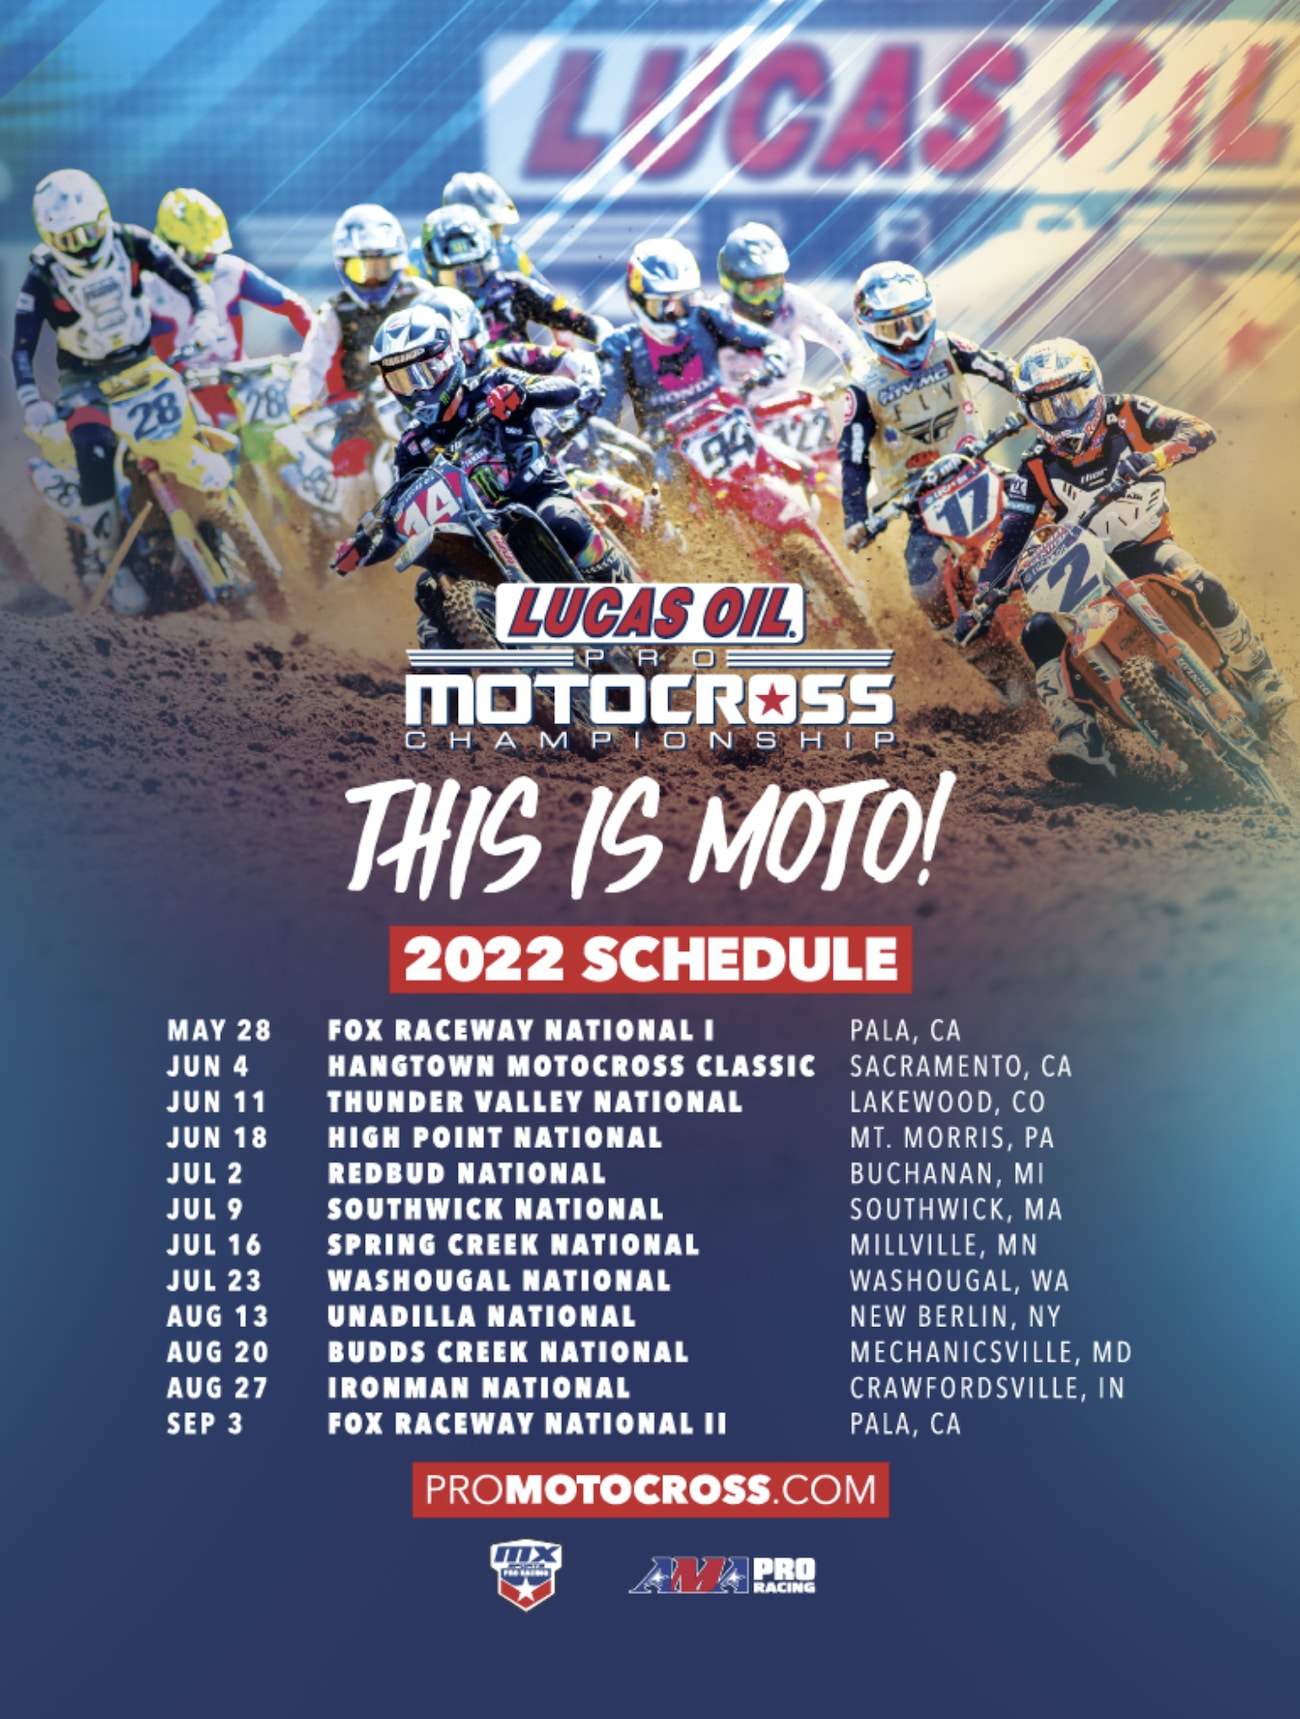 Motocross 2022 Schedule 2022 Ama Pro Motocross Schedule: Starts At Pala On May 28, 2022 & Ends At  Pala On Sept. 3 - Motocross Action Magazine